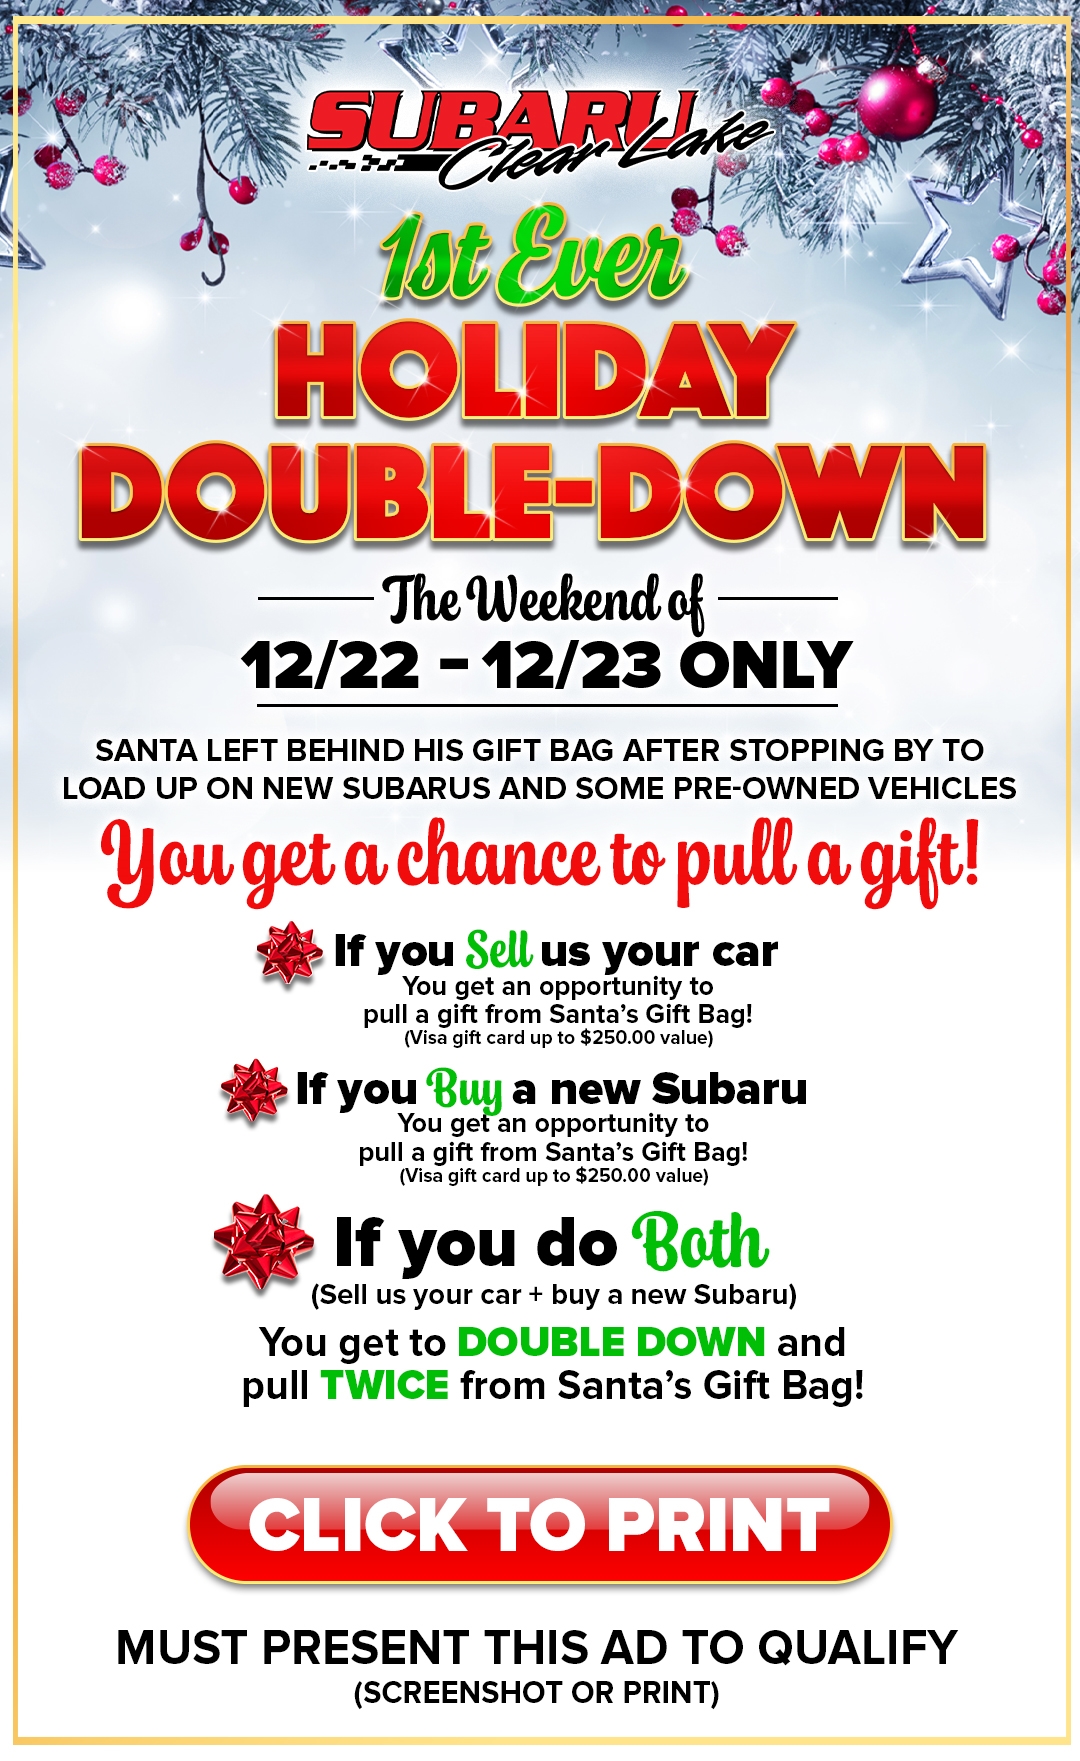 Make your holiday season brighter with Subaru of Clear Lake's Holiday Double Down! Buy or sell your vehicle now for a chance to pull a gift from Santa's sack. Visit us today!